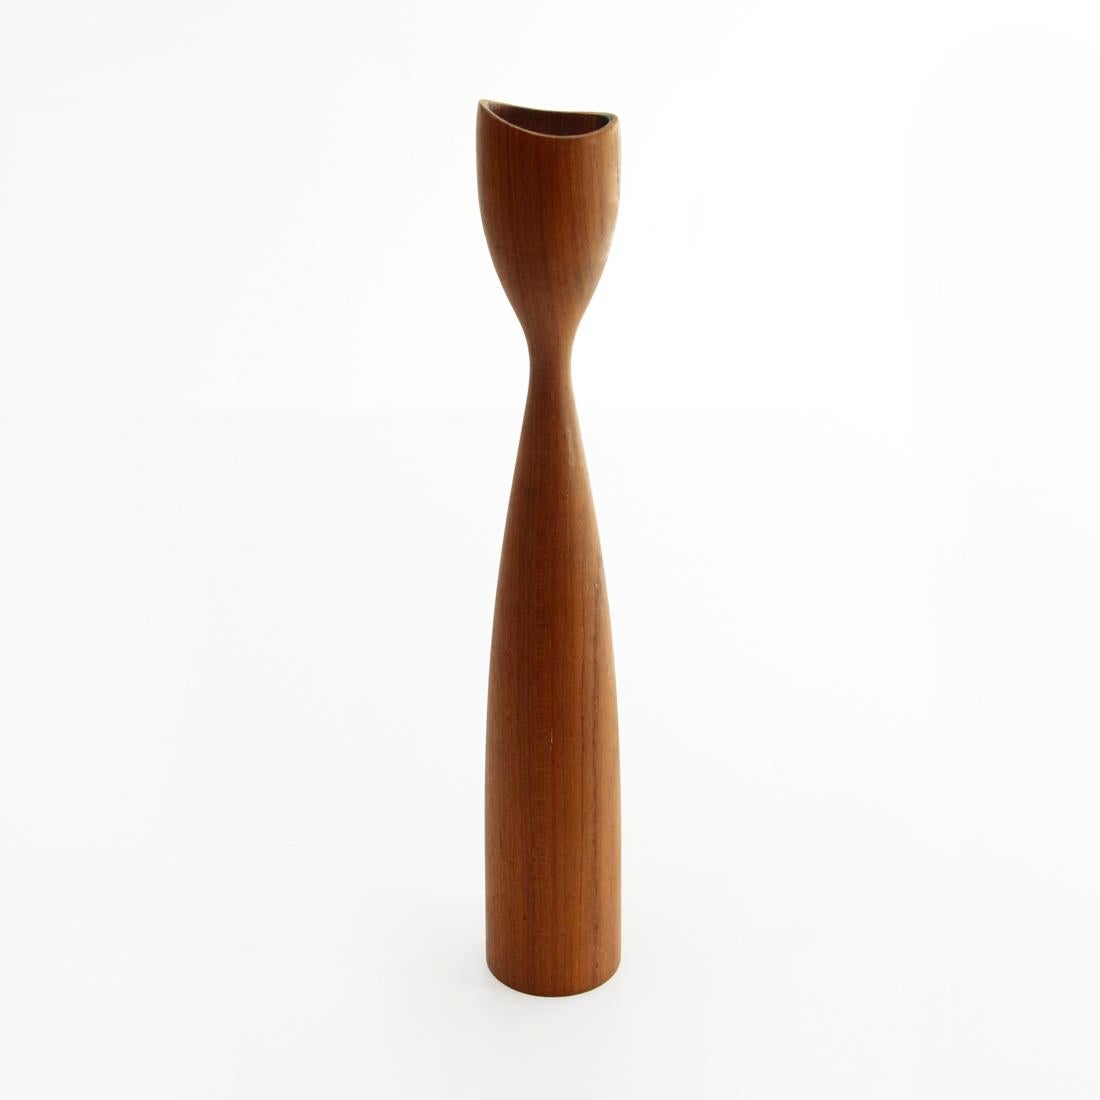 Candleholder produced in the 1960s in Denmark.
Shaped teak wood structure.
Good general conditions, some signs due to the usual use over time.

Dimensions: Diameter 4.5 cm, height 29 cm.

  